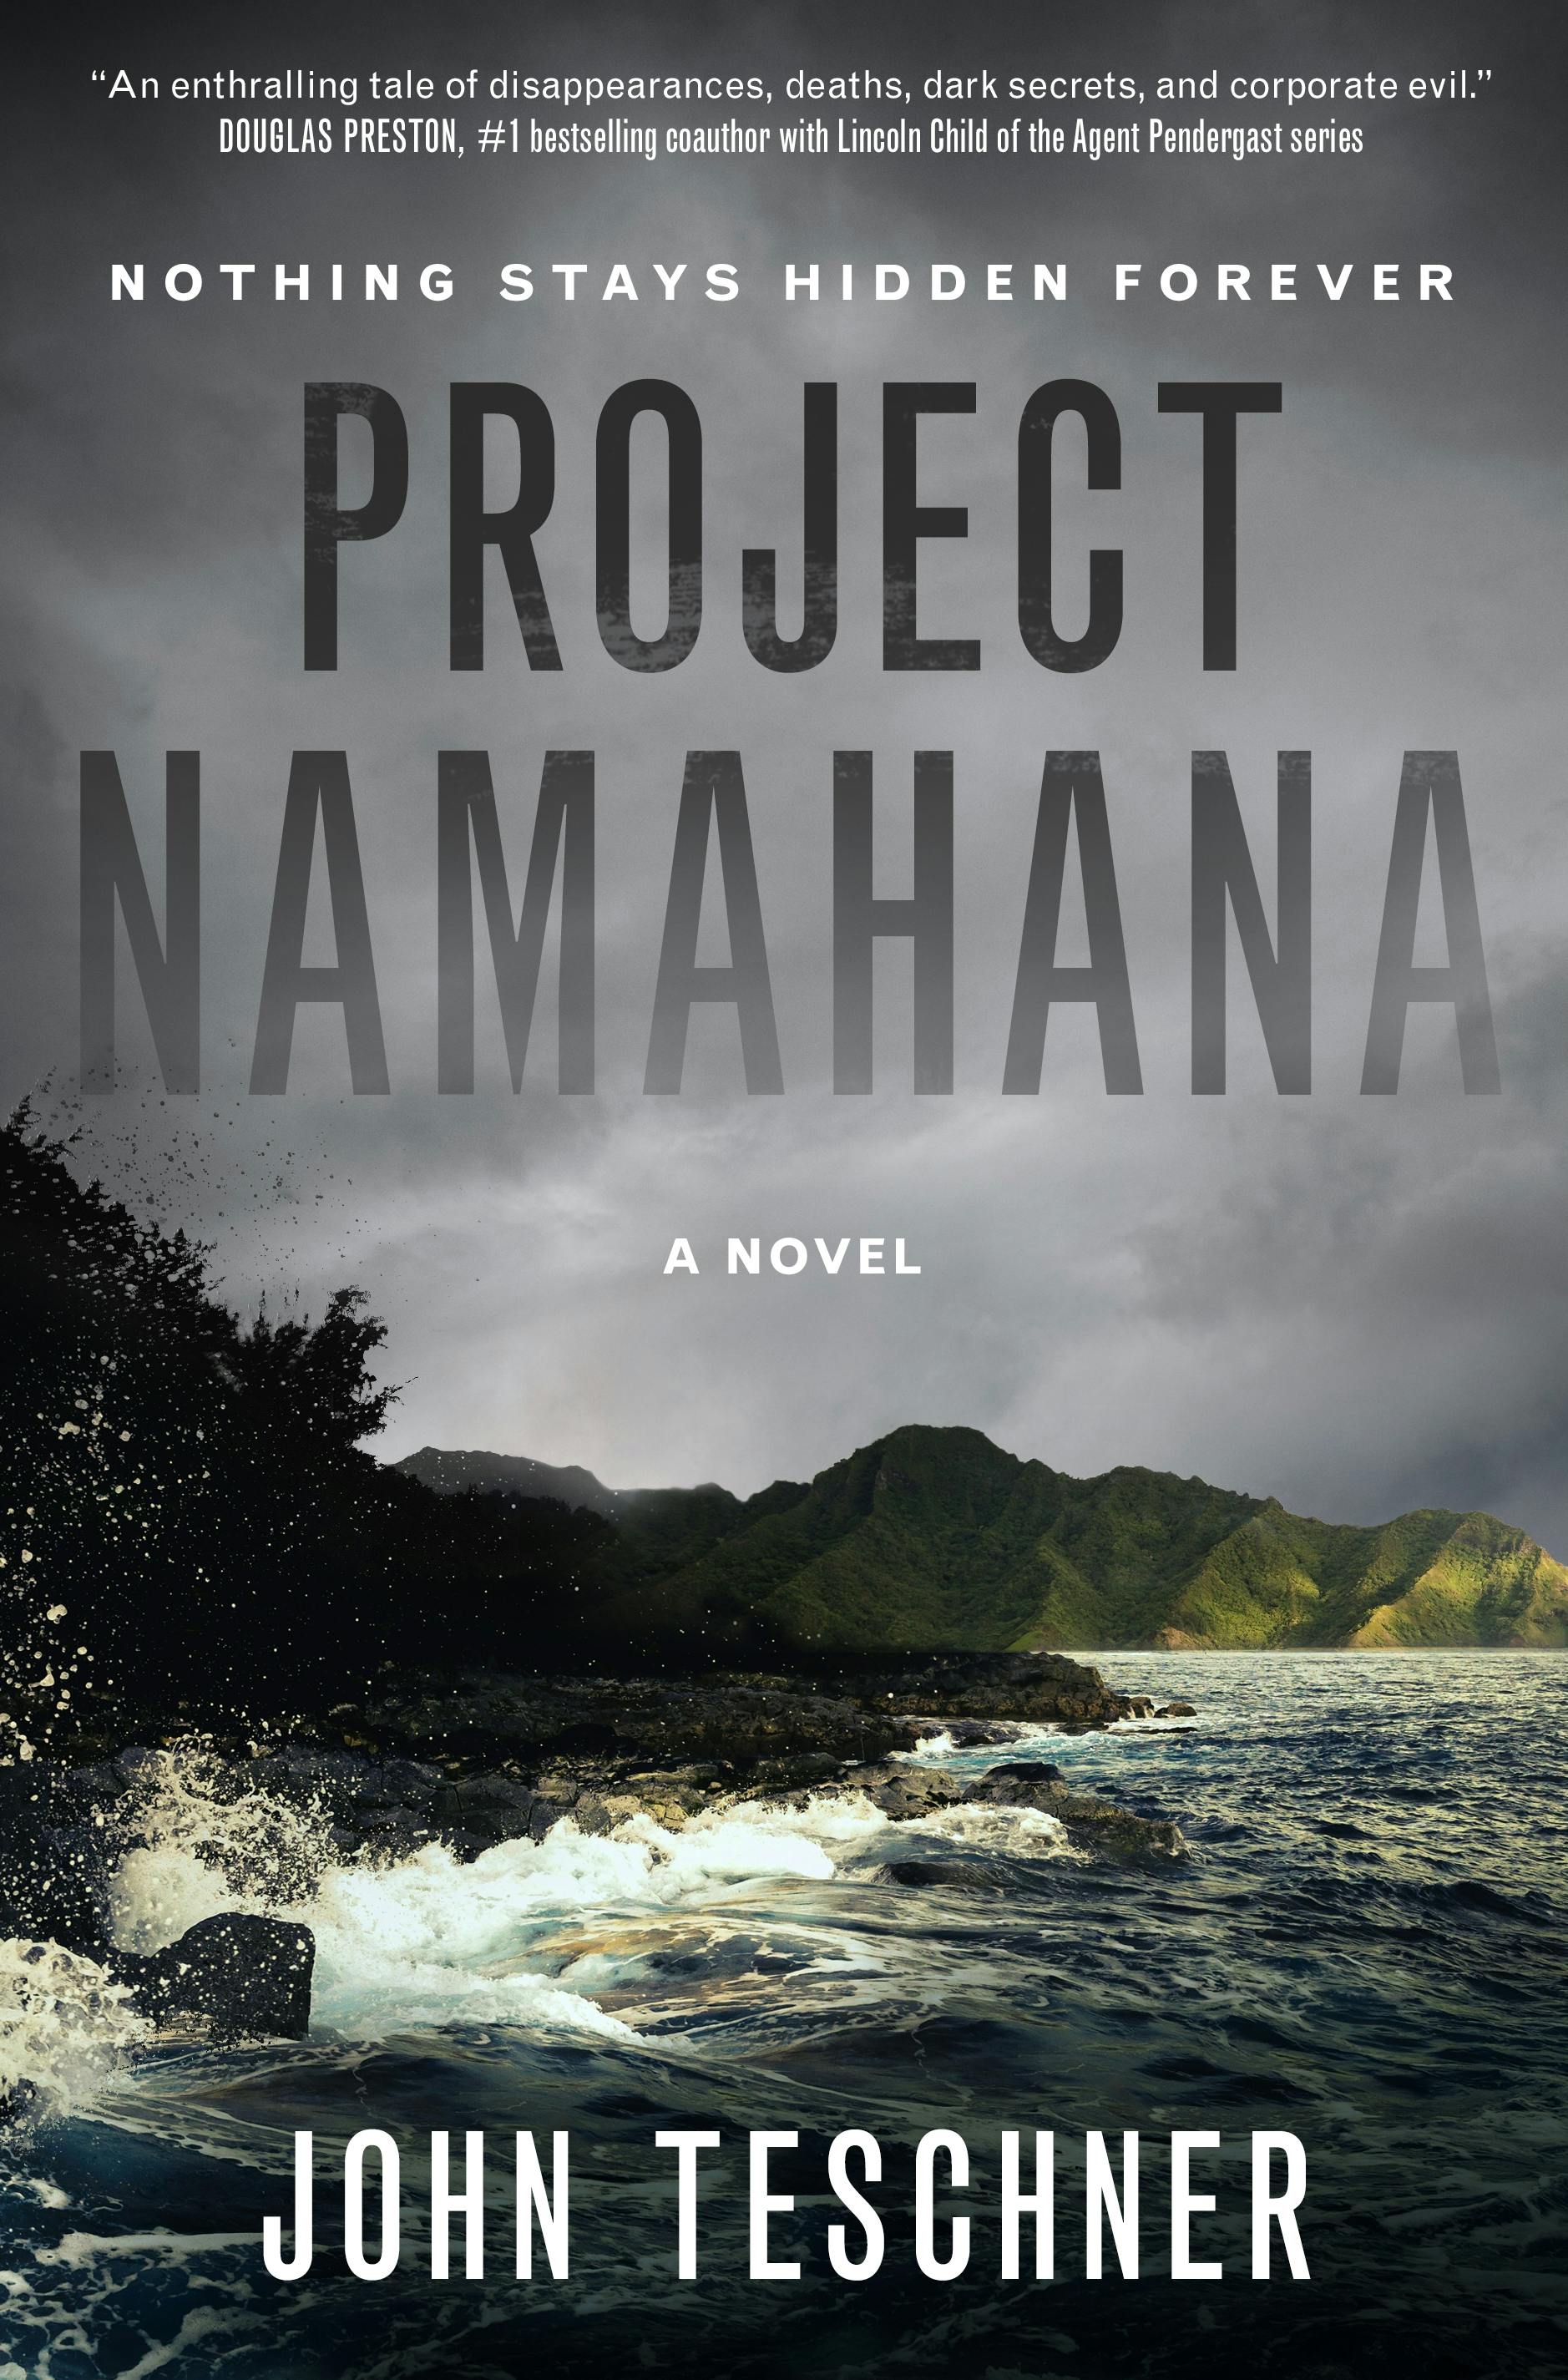 Cover for the book titled as: Project Namahana